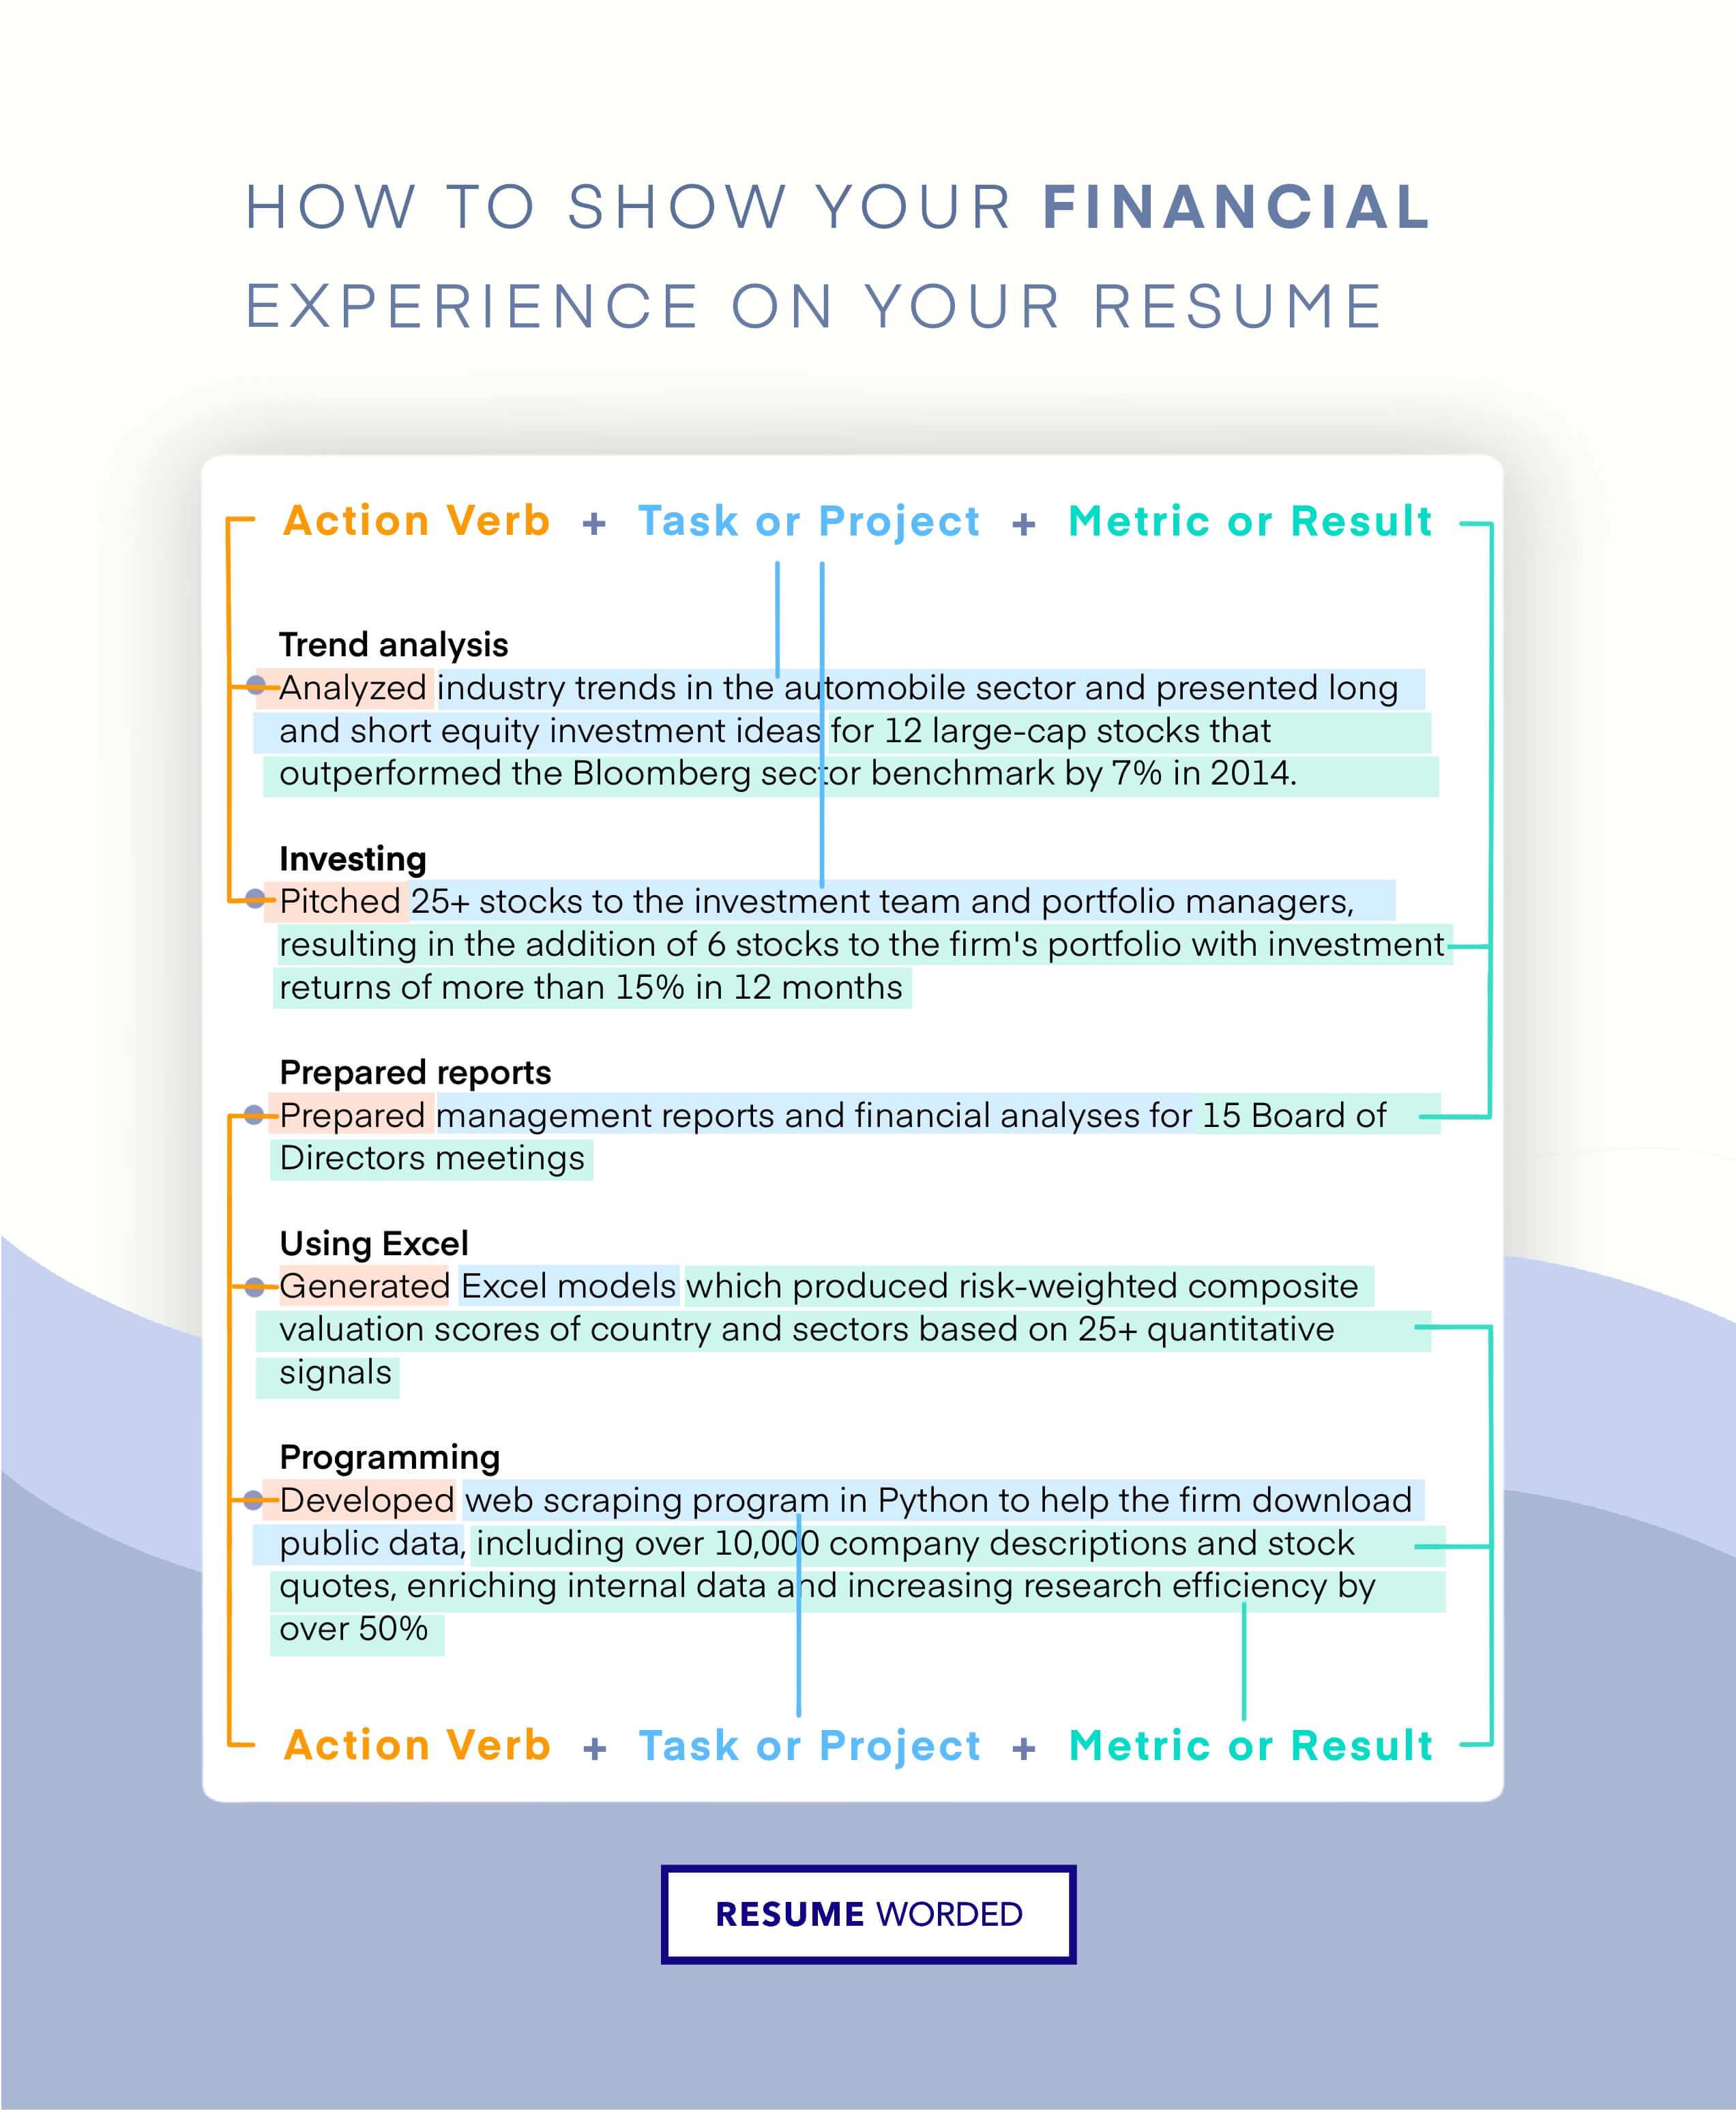 Show your experience helping clients meet their financial goals - Portfolio Manager Resume